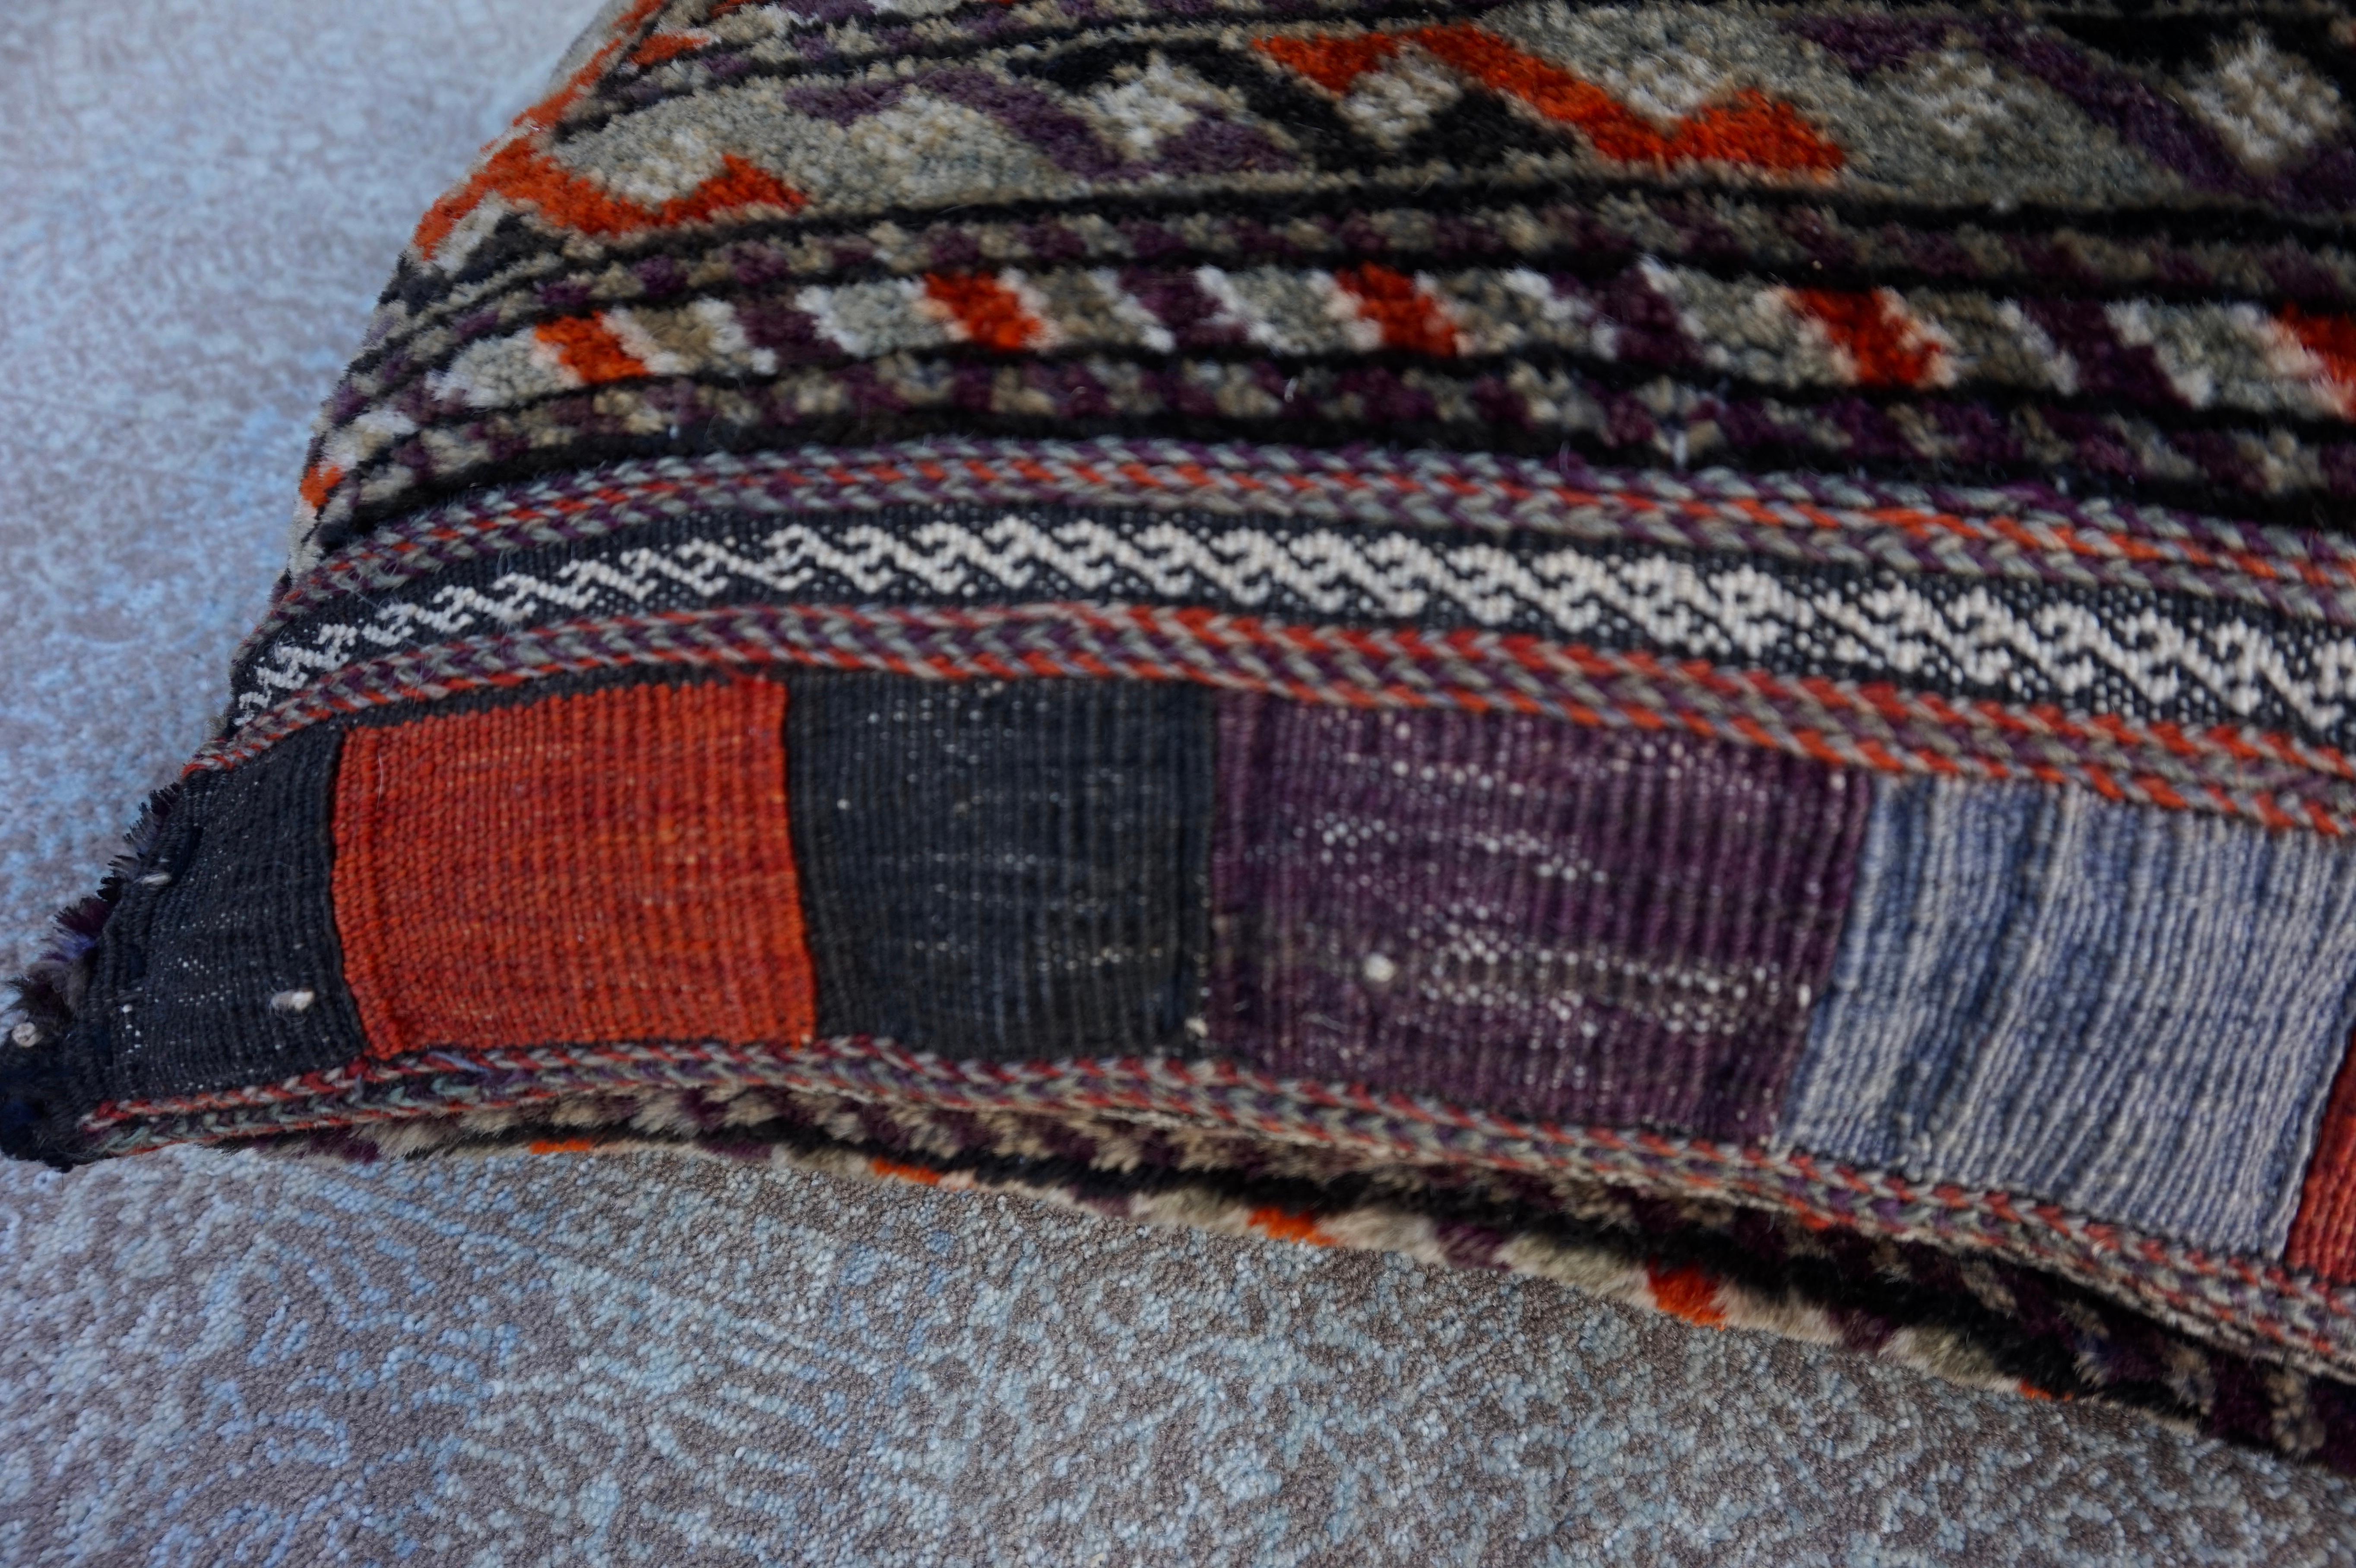 Rustic Hand-Knotted Wool Cushion Pillow with Geometric Tribal Patterns For Sale 4